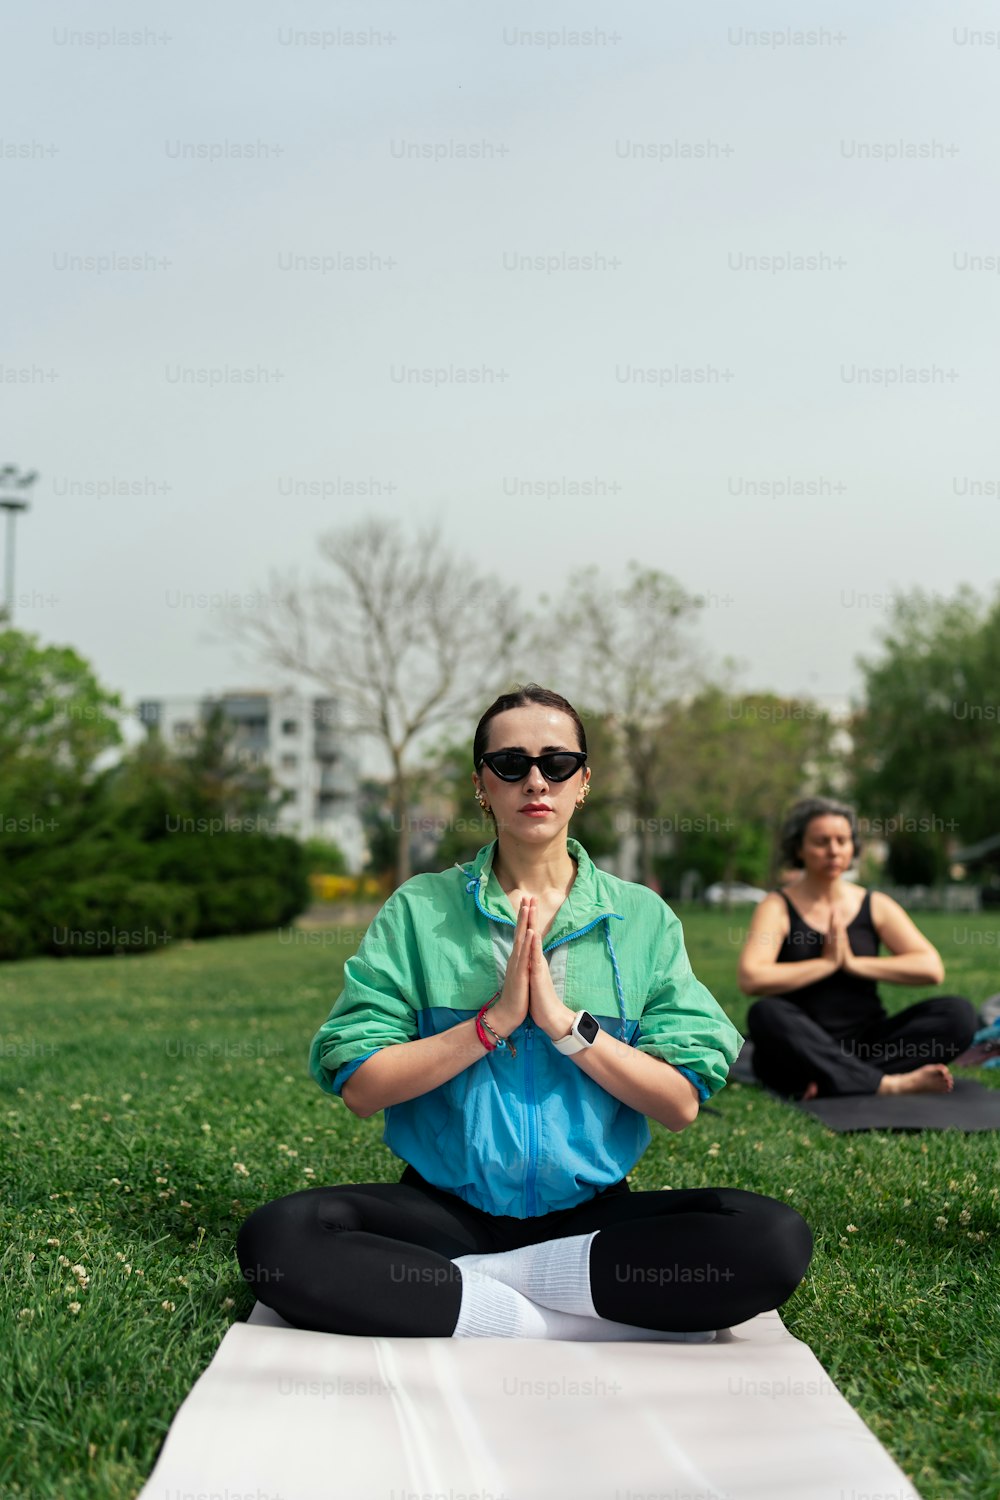 a woman sitting in a yoga position in a park